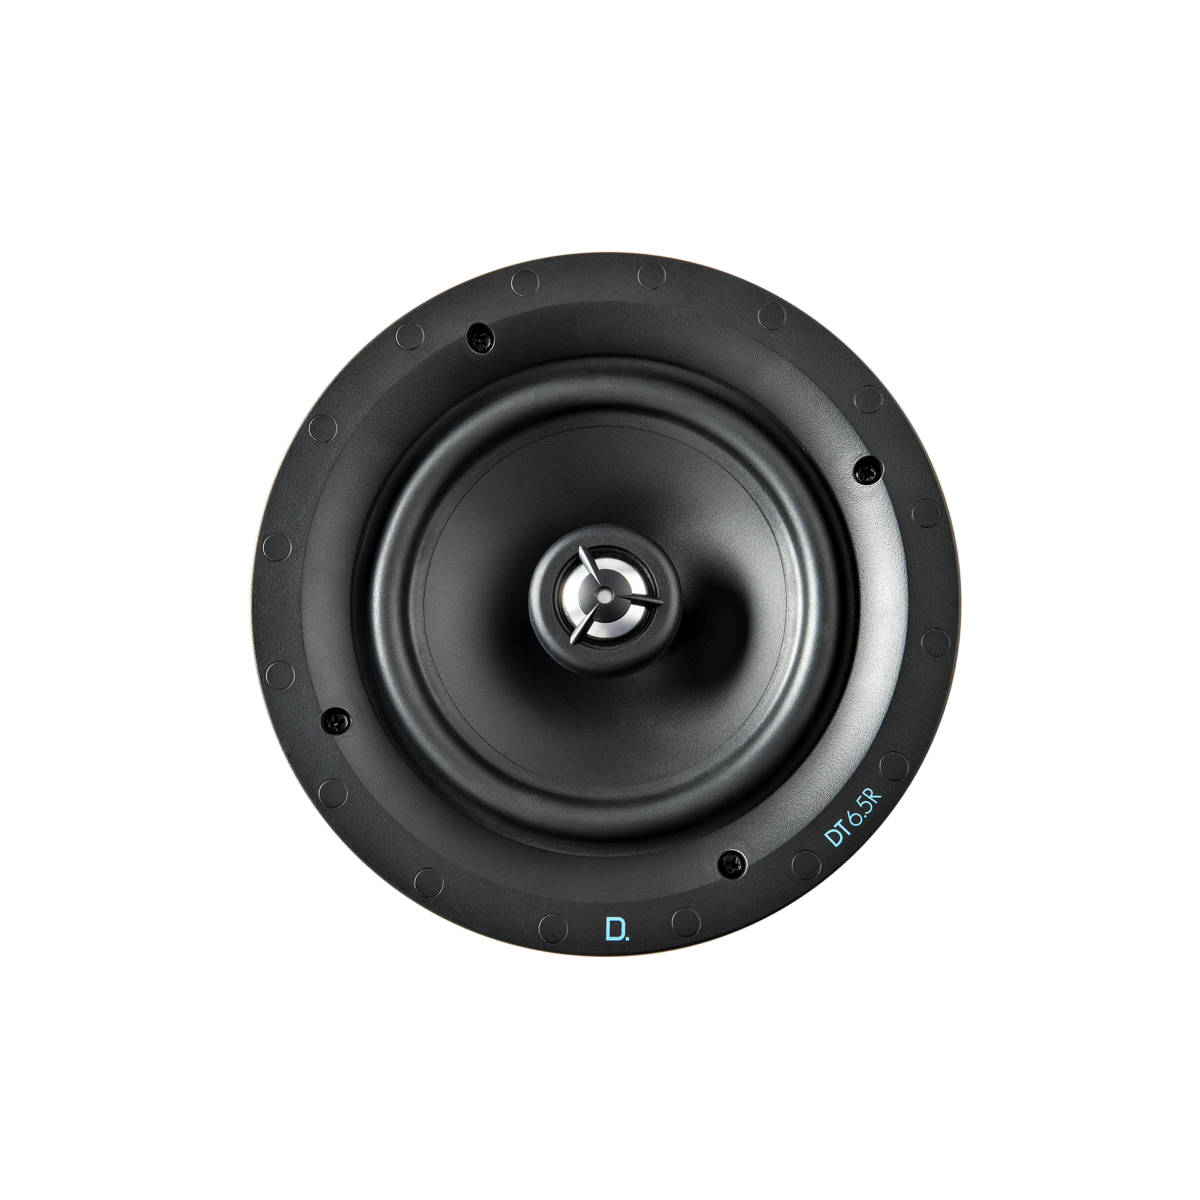 Definitive Technology DT 6.5 R DT Series Round 6.5" In-Ceiling Speaker - Ooberpad